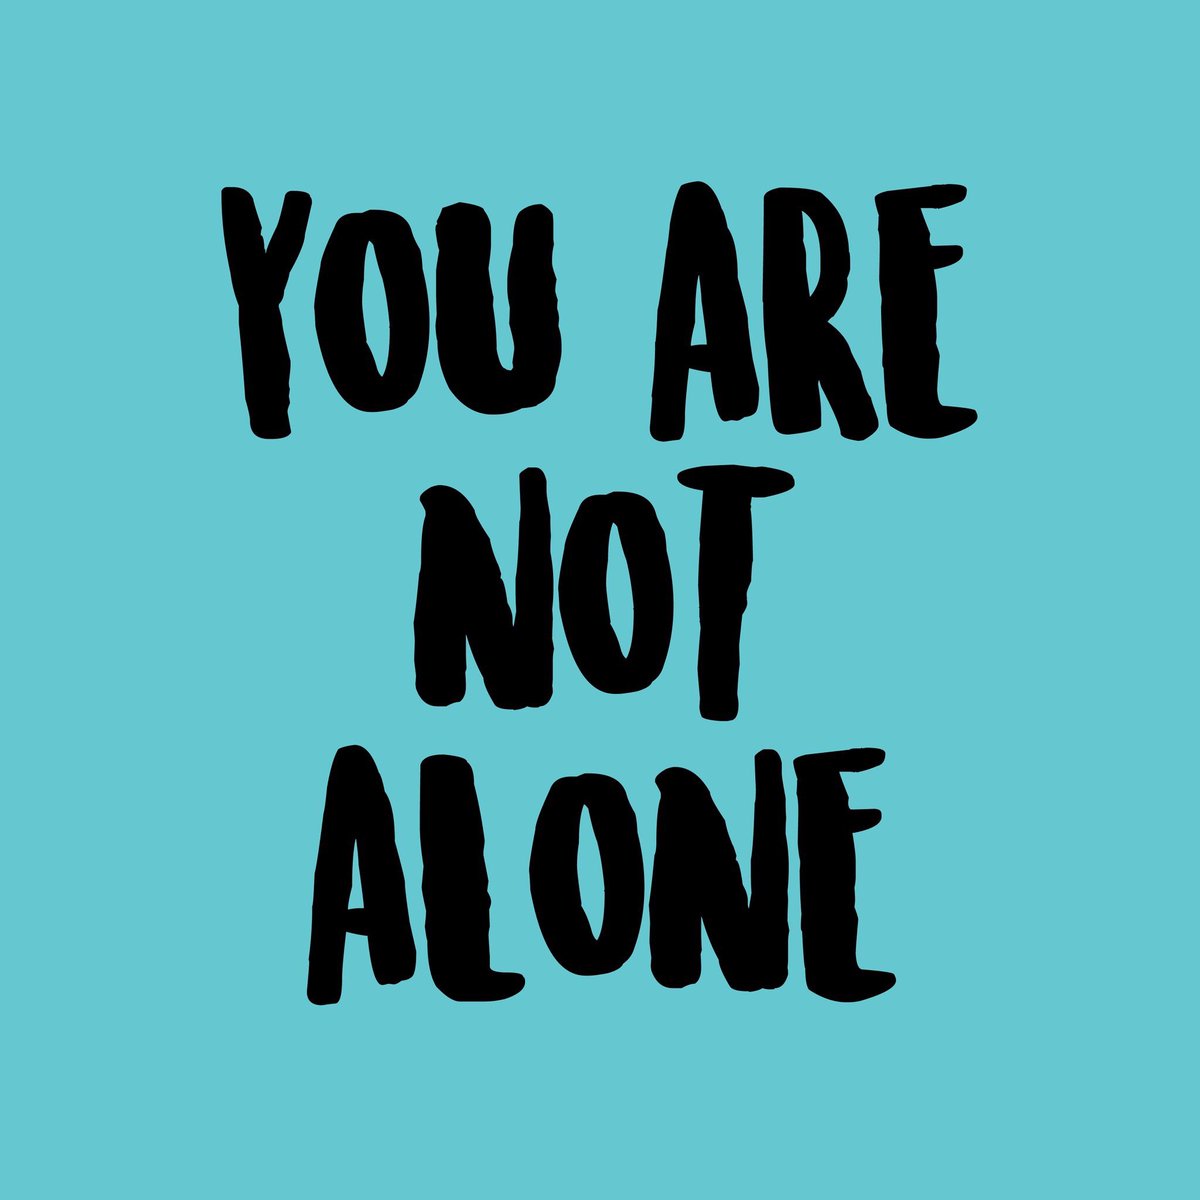 Get You are not alone images For Free